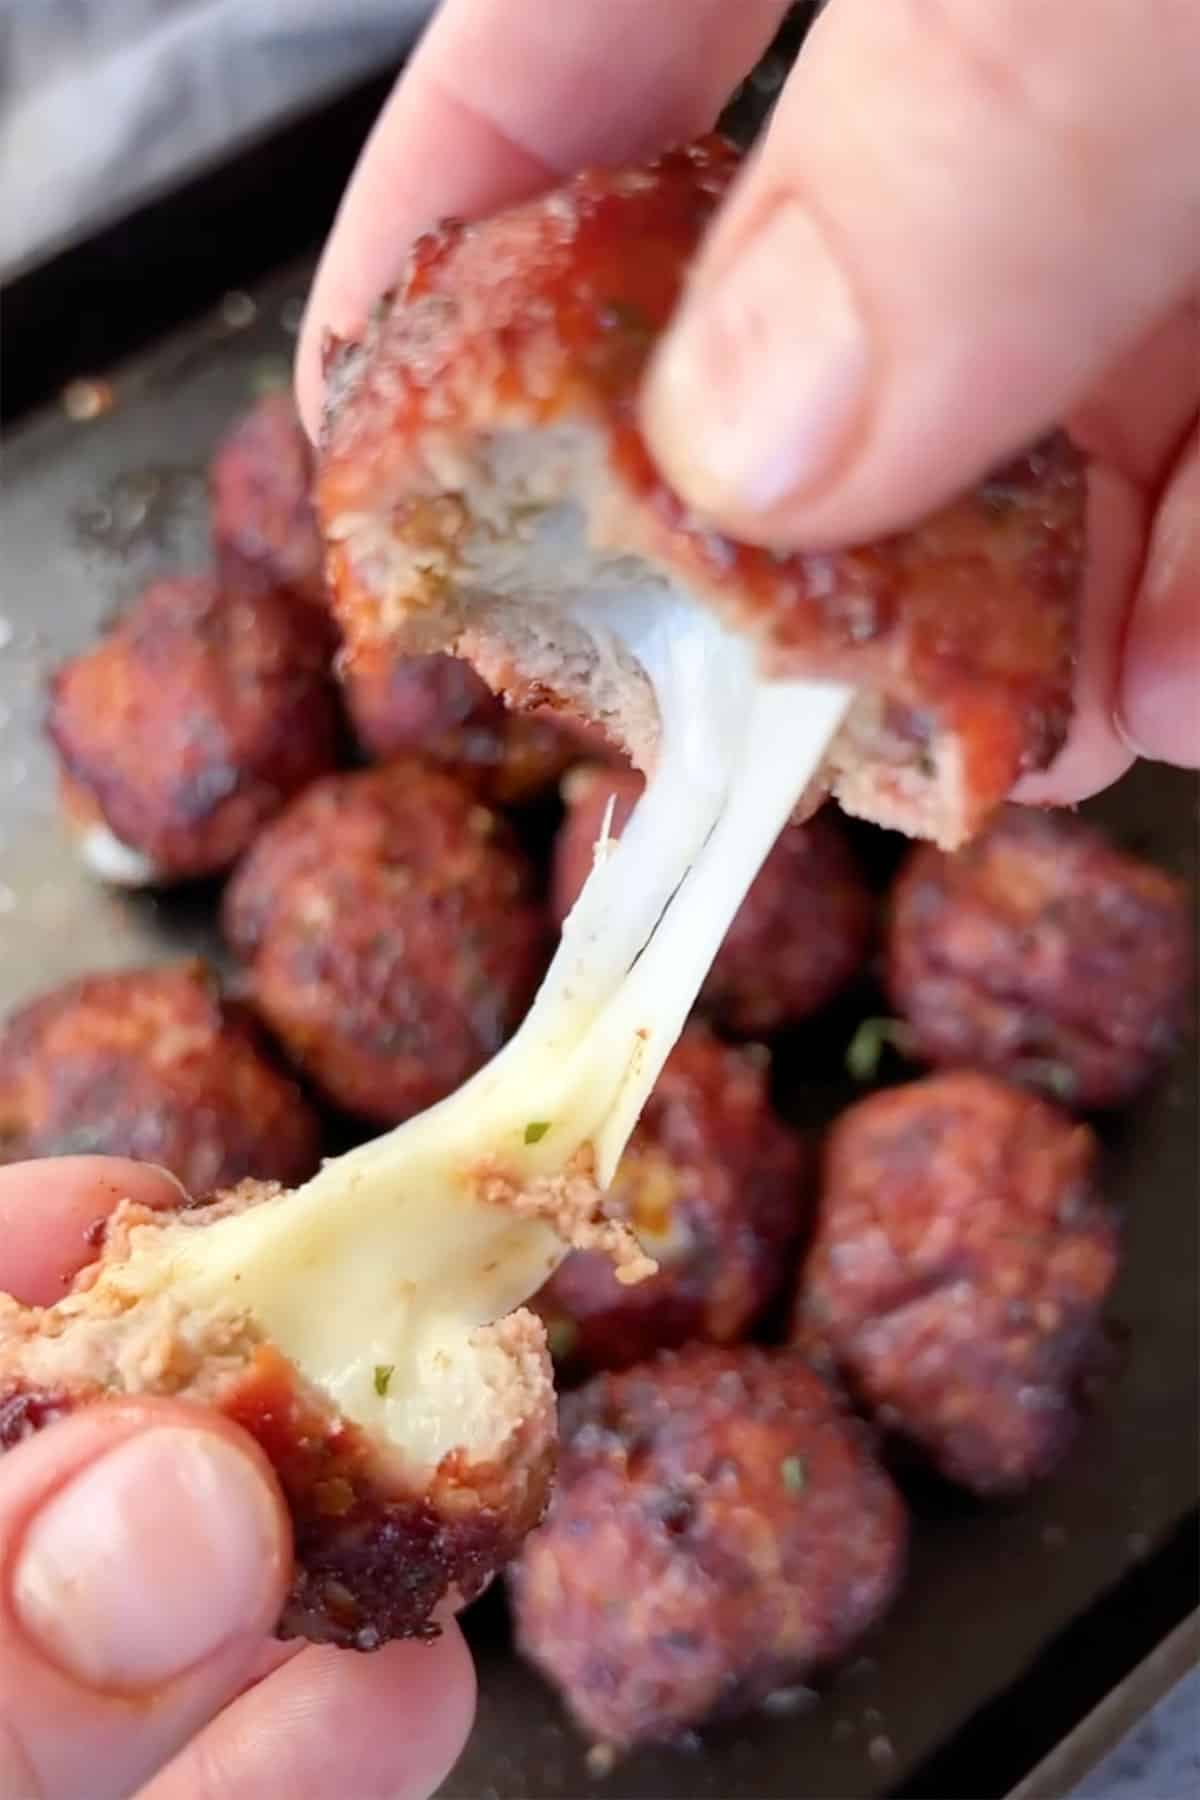 hands pulling meatball apart to reveal cheese.